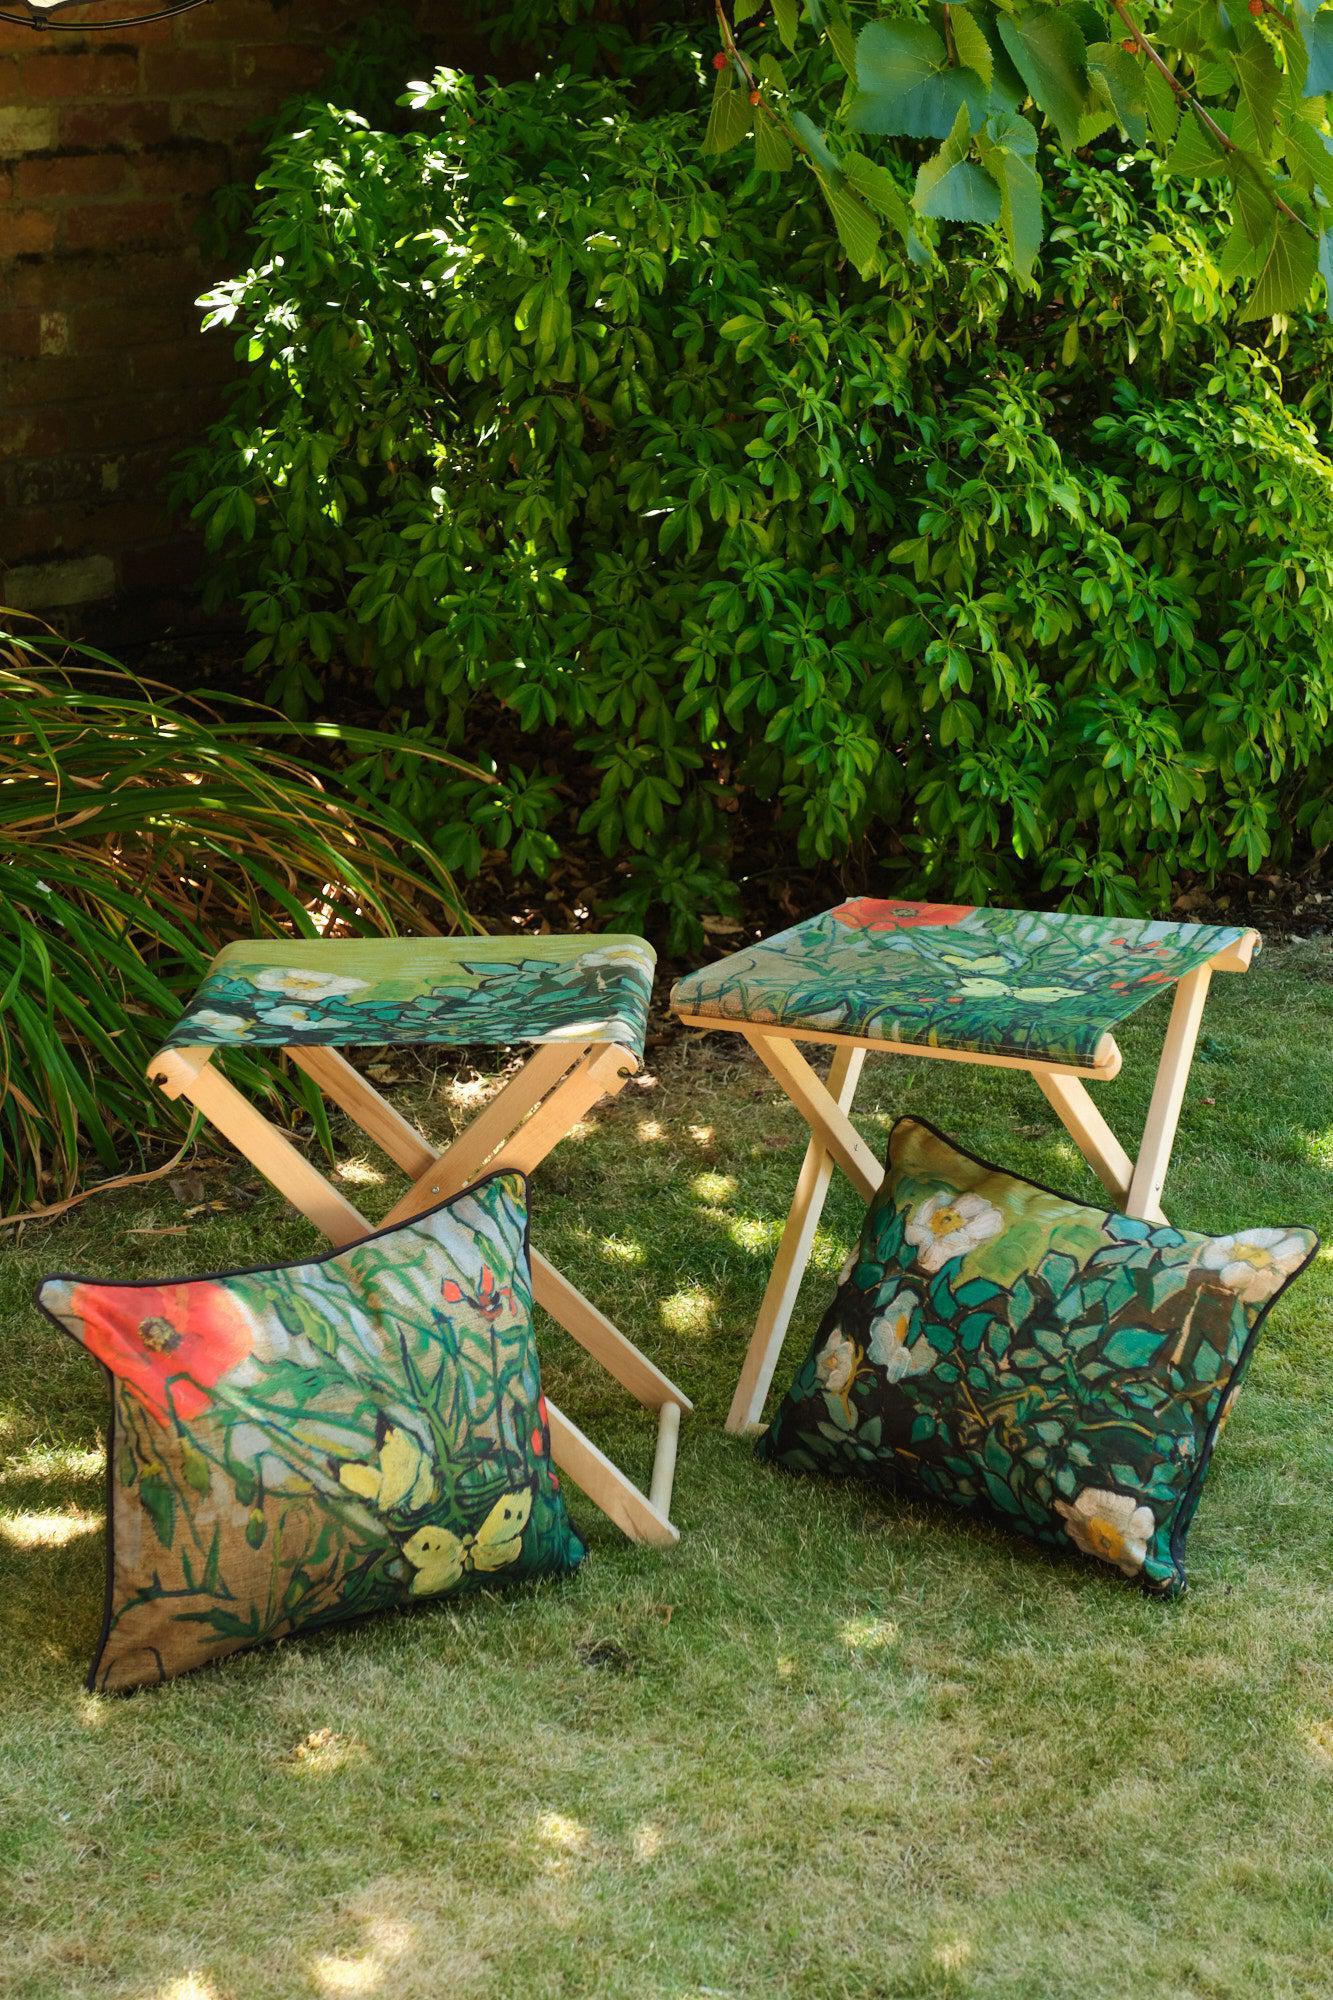 Poppies and Butterflies - Van Gogh Museum Outdoor Cushion